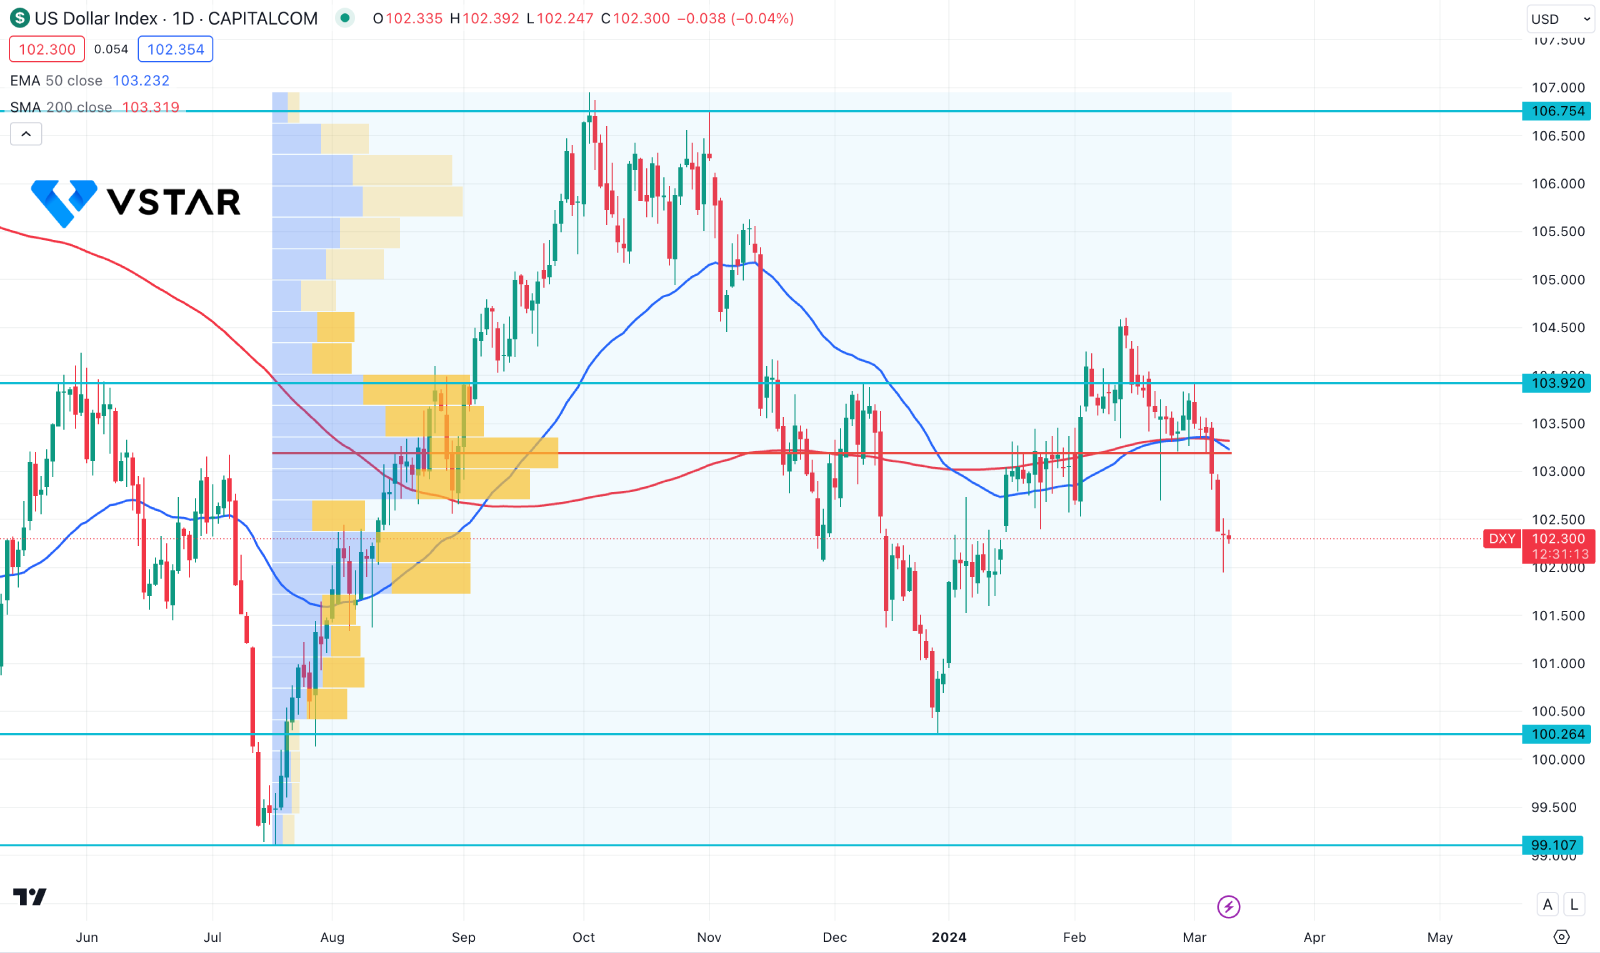 US Dollar Index (USDX) Sees More Downside pressure from The Rate Cut possibility